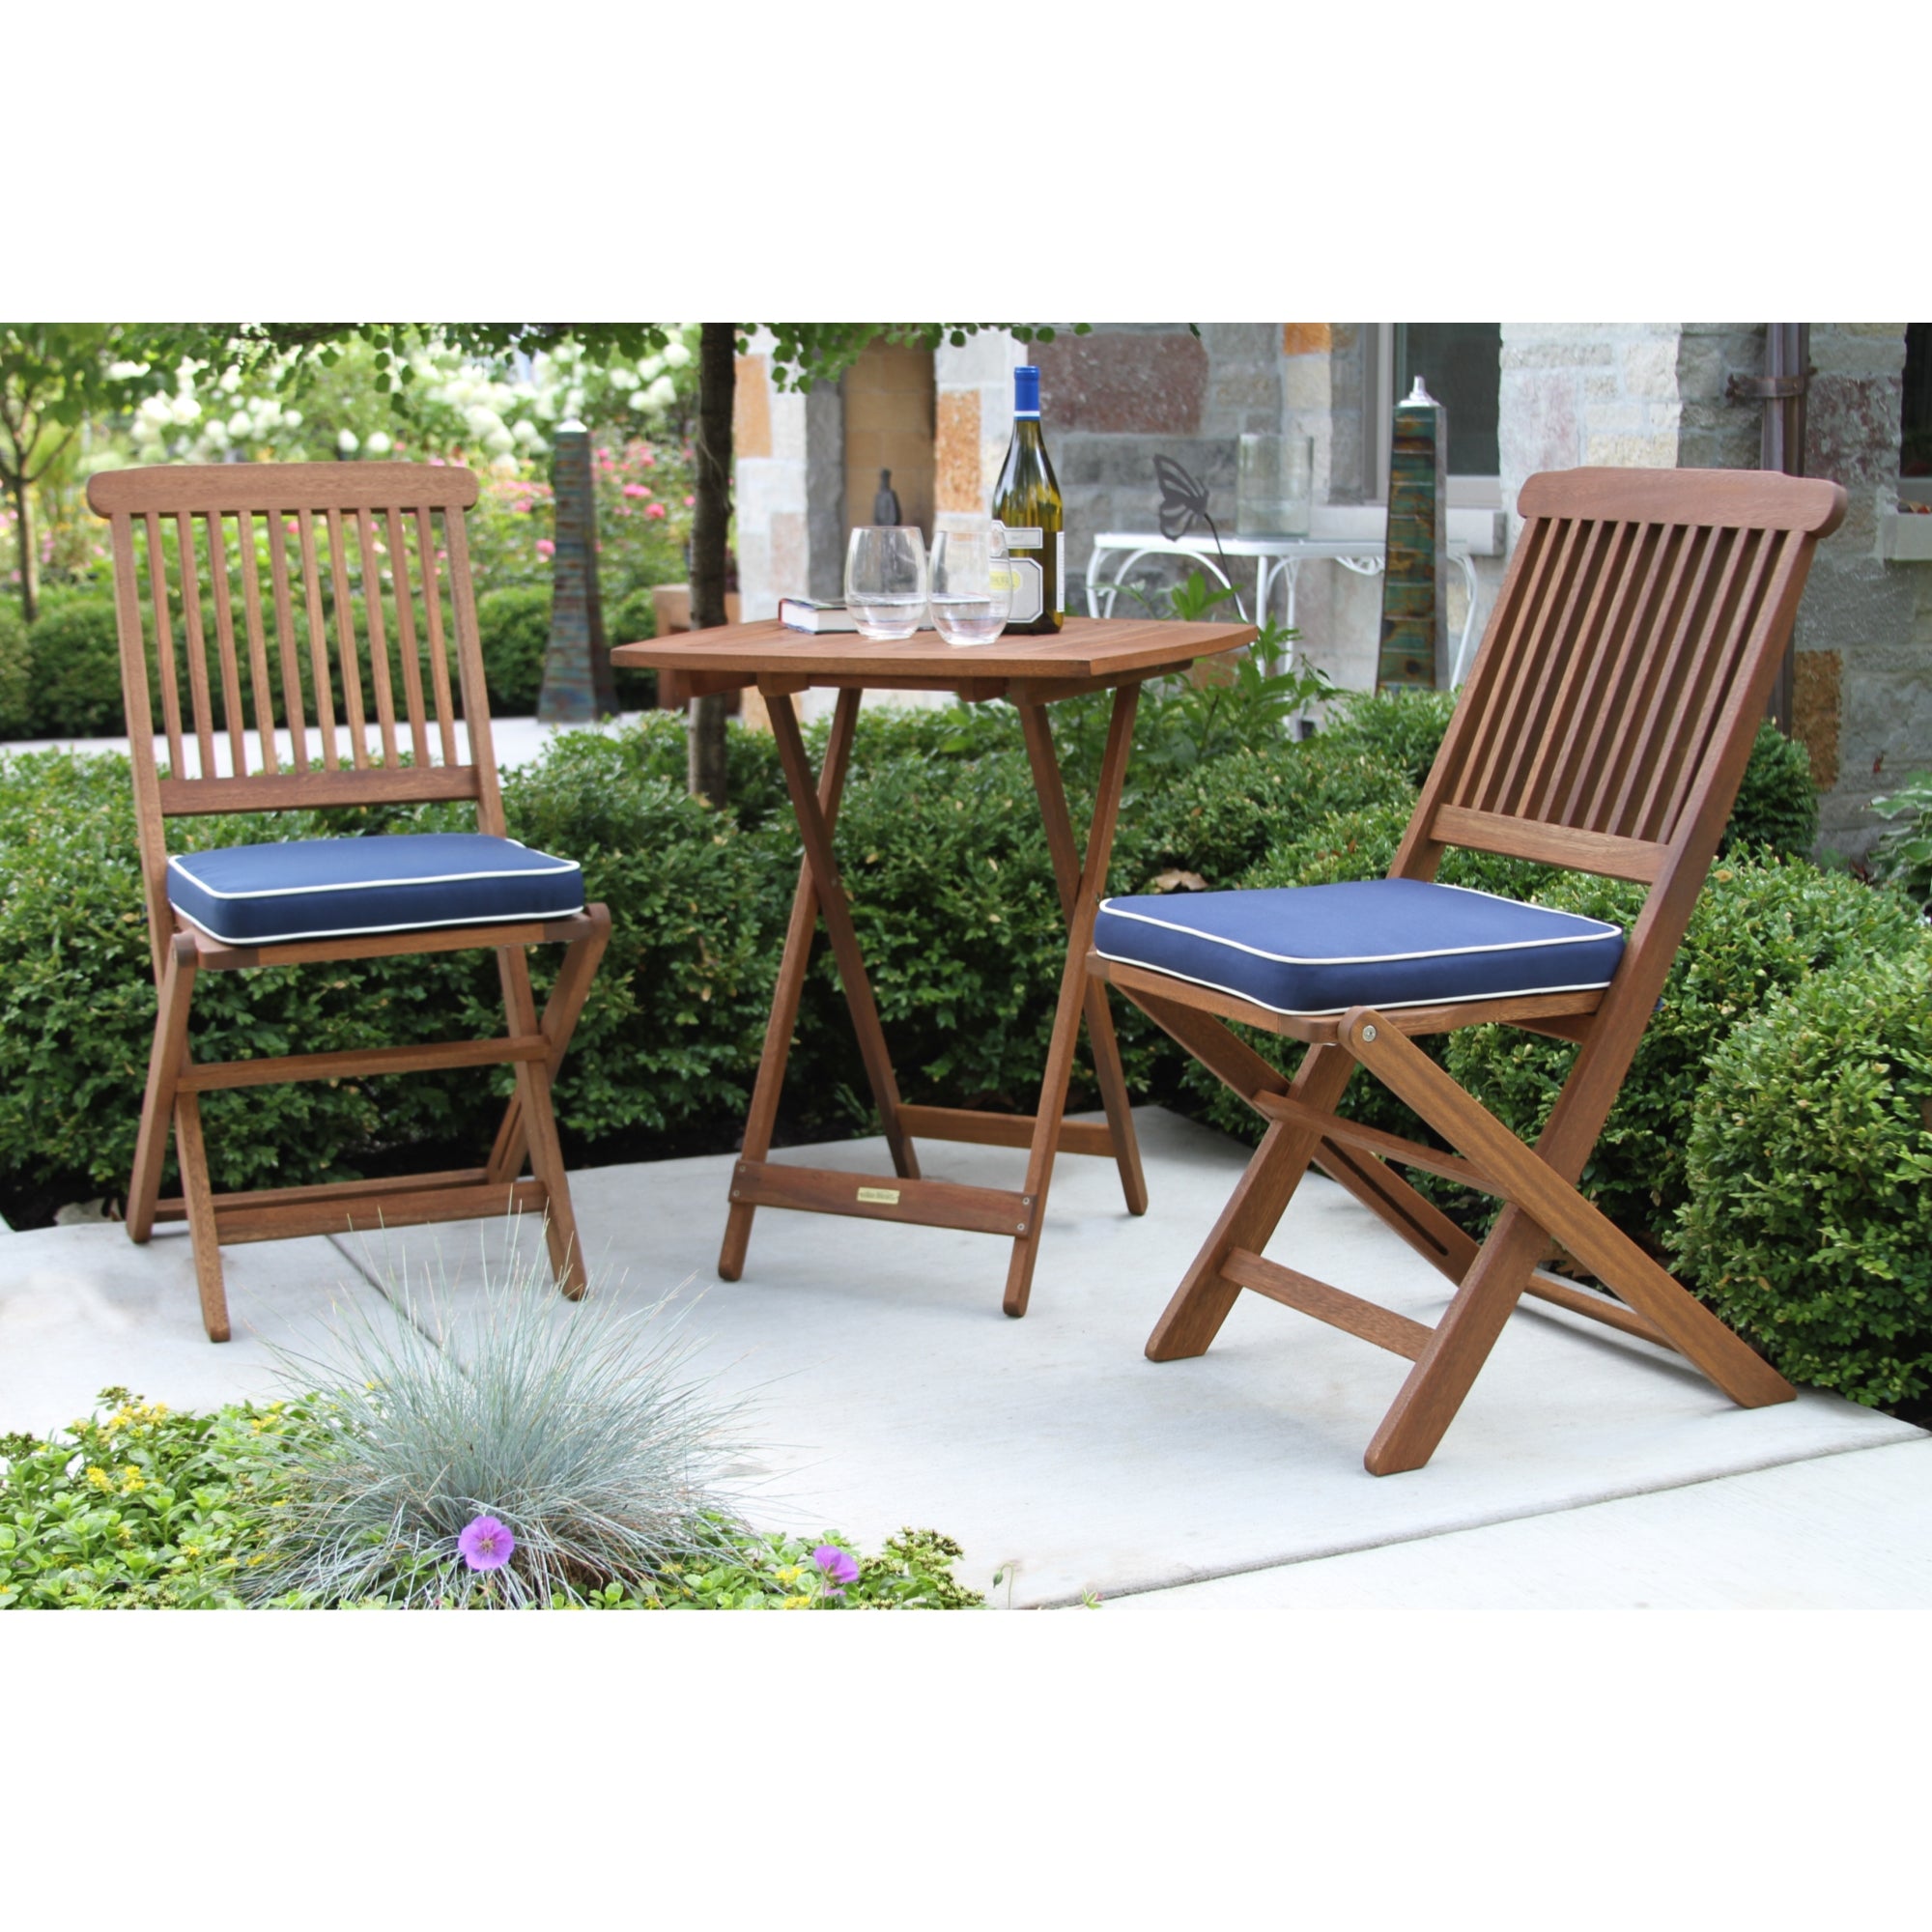 Outdoor Interiors Eucalyptus Wood 3-Piece Square Foldable Bistro Outdoor Furniture Patio Set, Table and 2 Chairs with Cushions